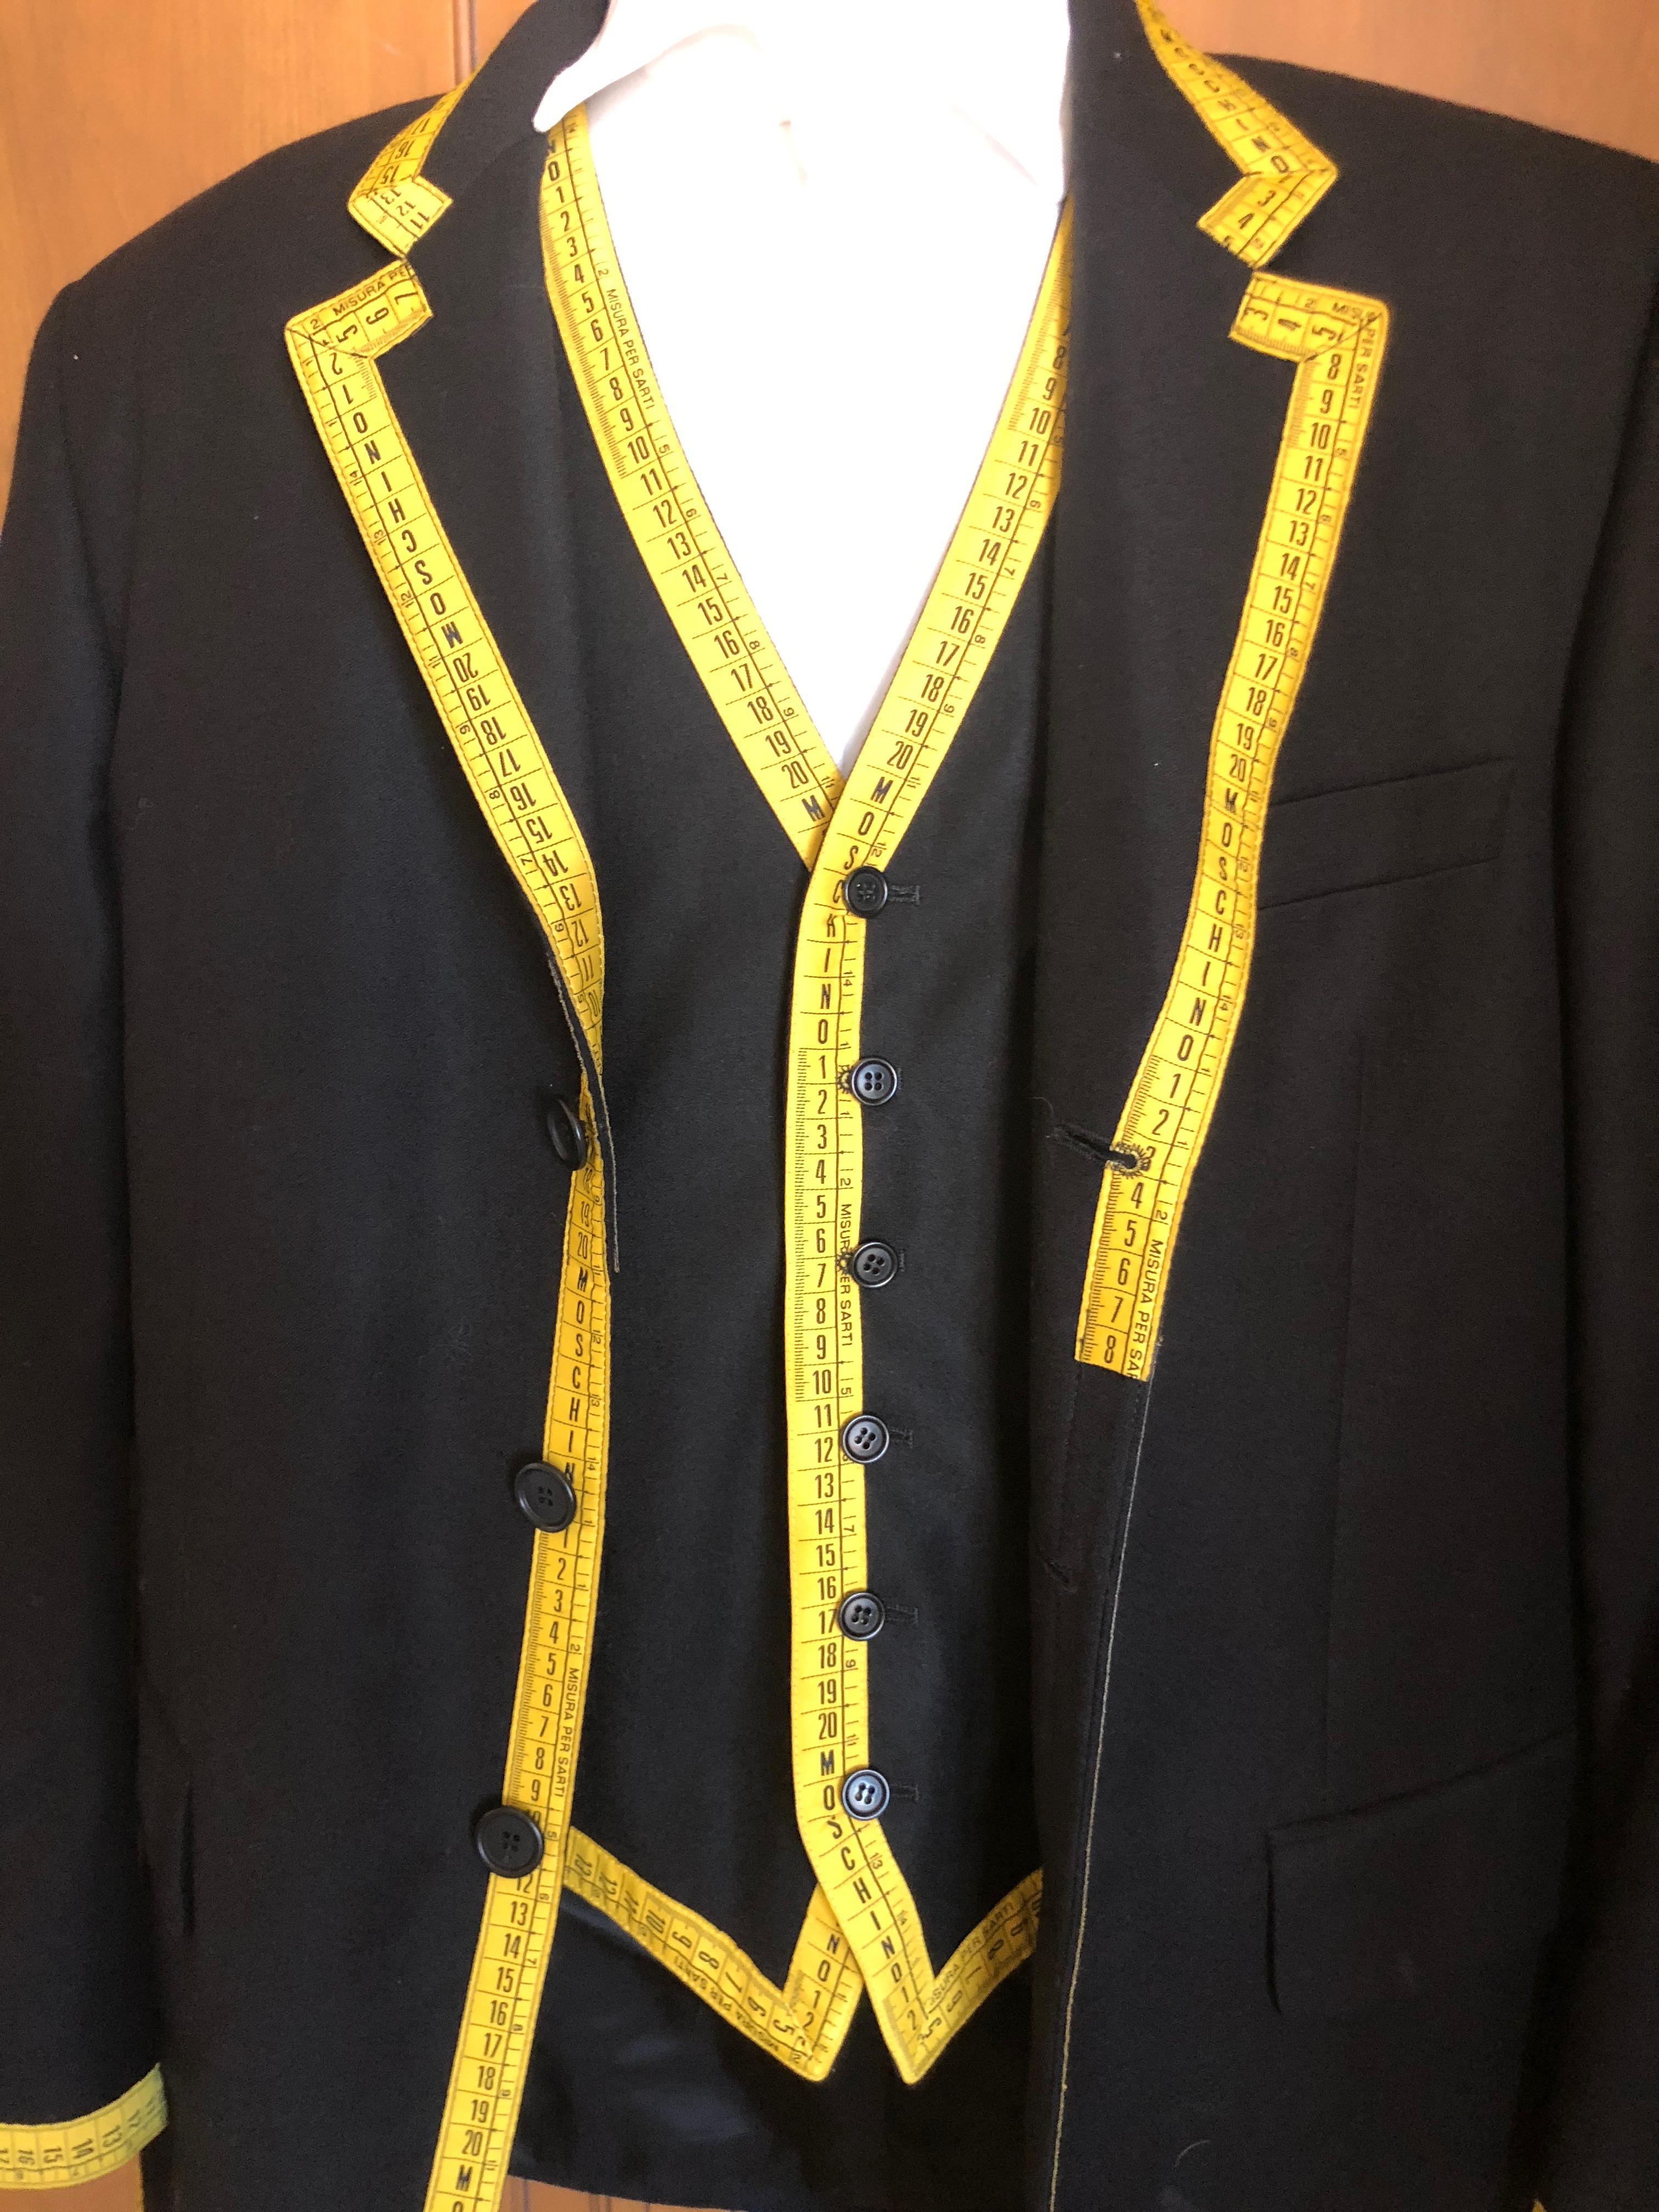 Moschino 1989 Cheap & Chic Iconic Vintage Mens Tape Measure Jacket and Vest
Museum piece, in excellent condition 
Appx Measurements ; 
Chest 46